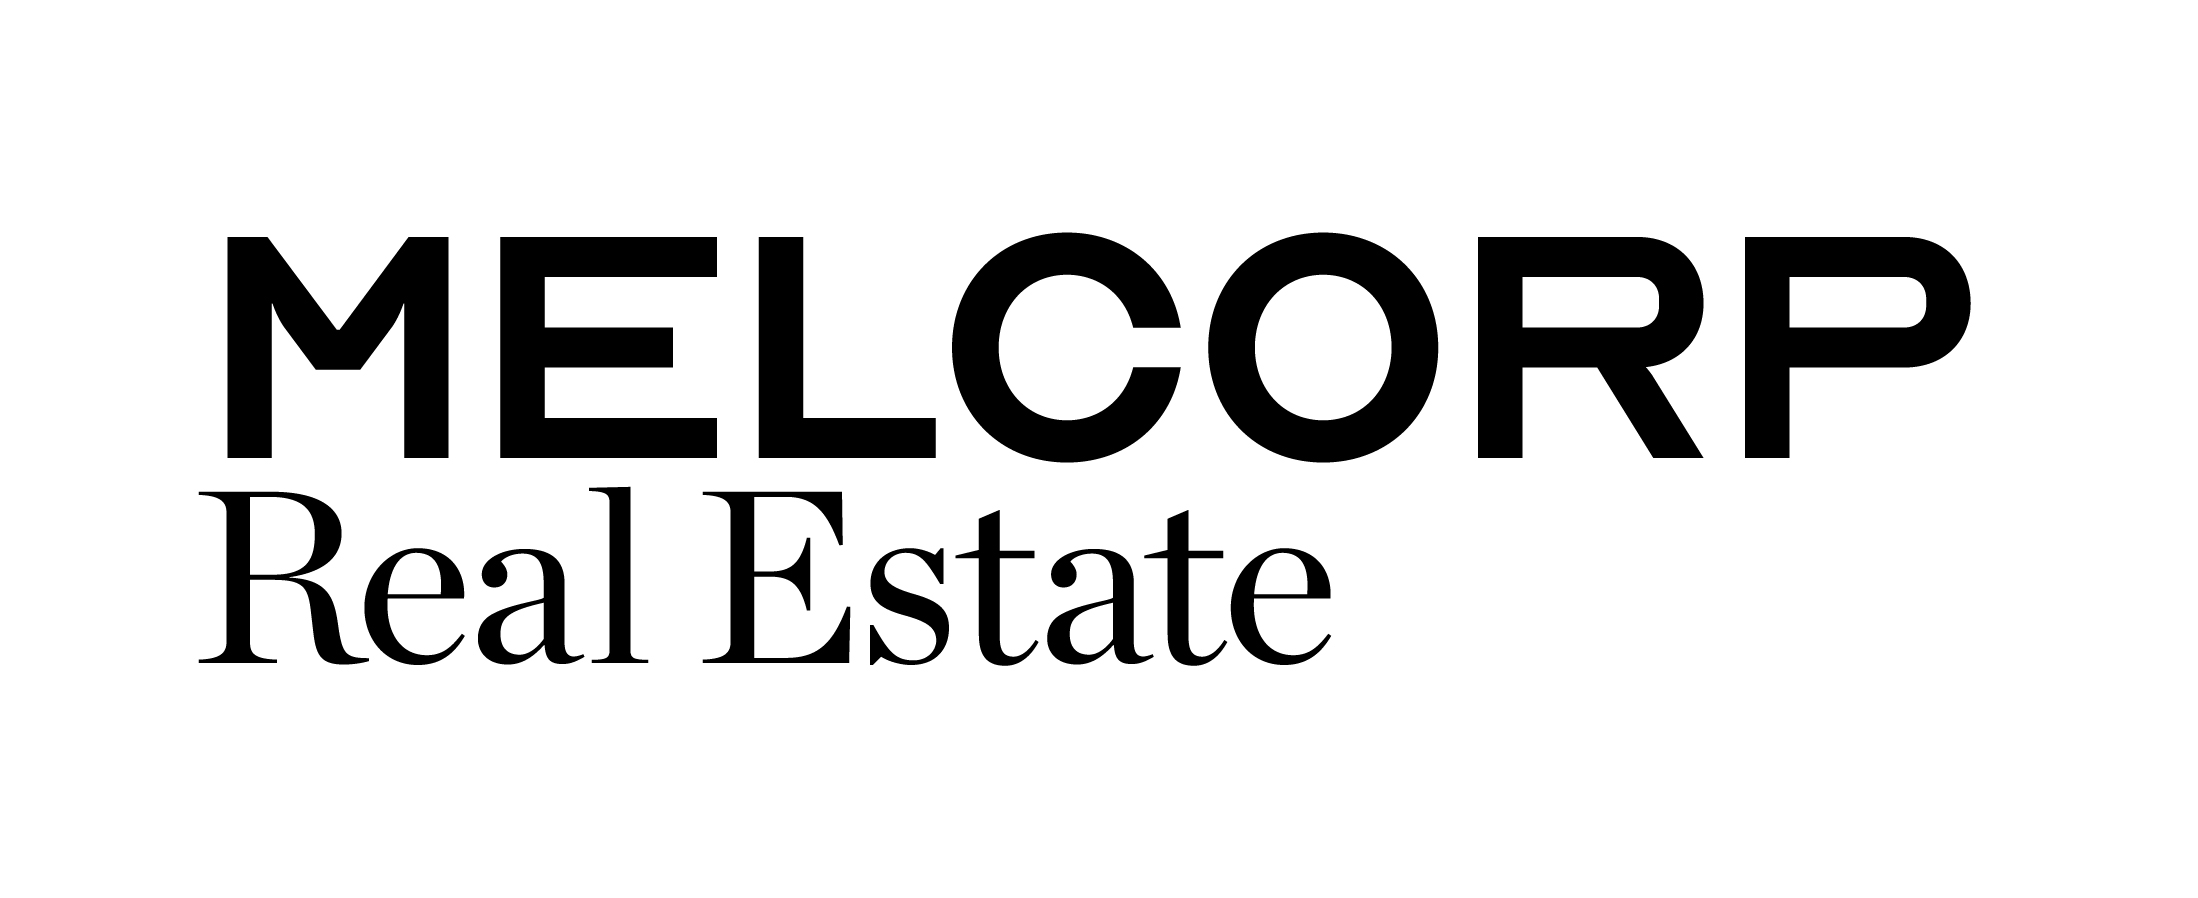 Melcorp Real Estate Real Estate Agent